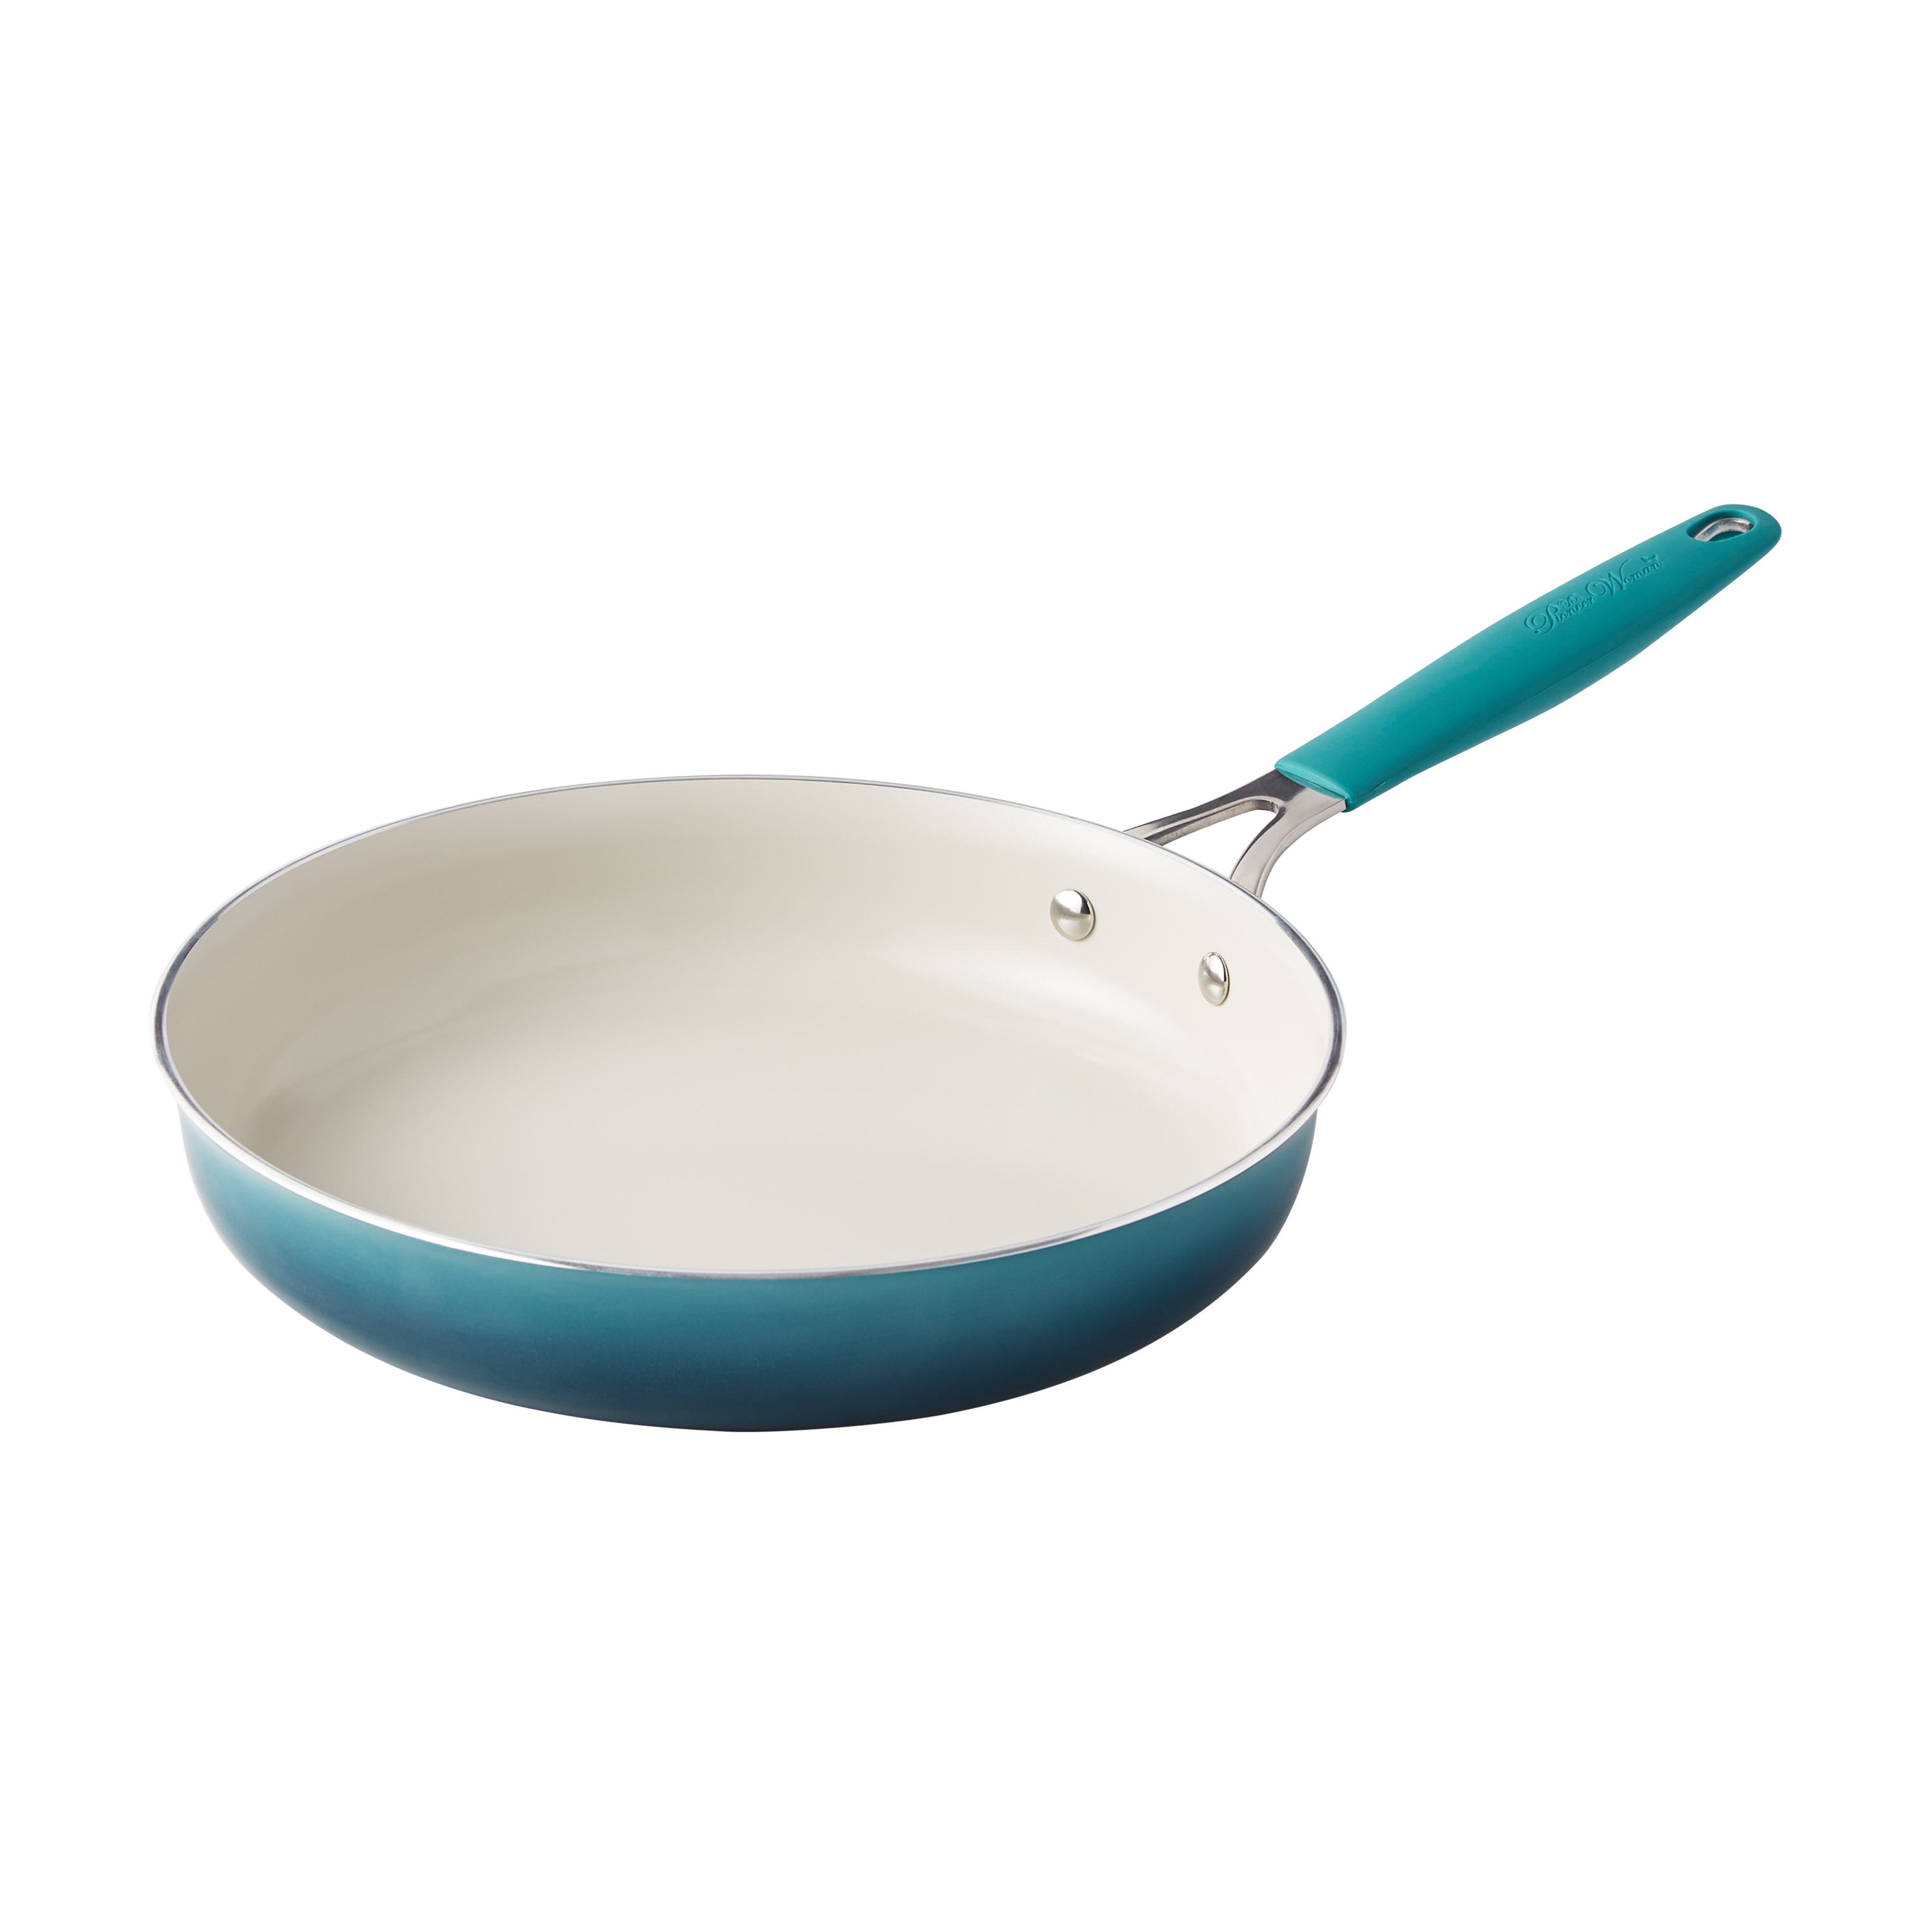 The Pioneer Woman 12-Piece Classic Belly Ceramic Cookware Set, Porcelain Enamel, Ombre Teal - image 5 of 11